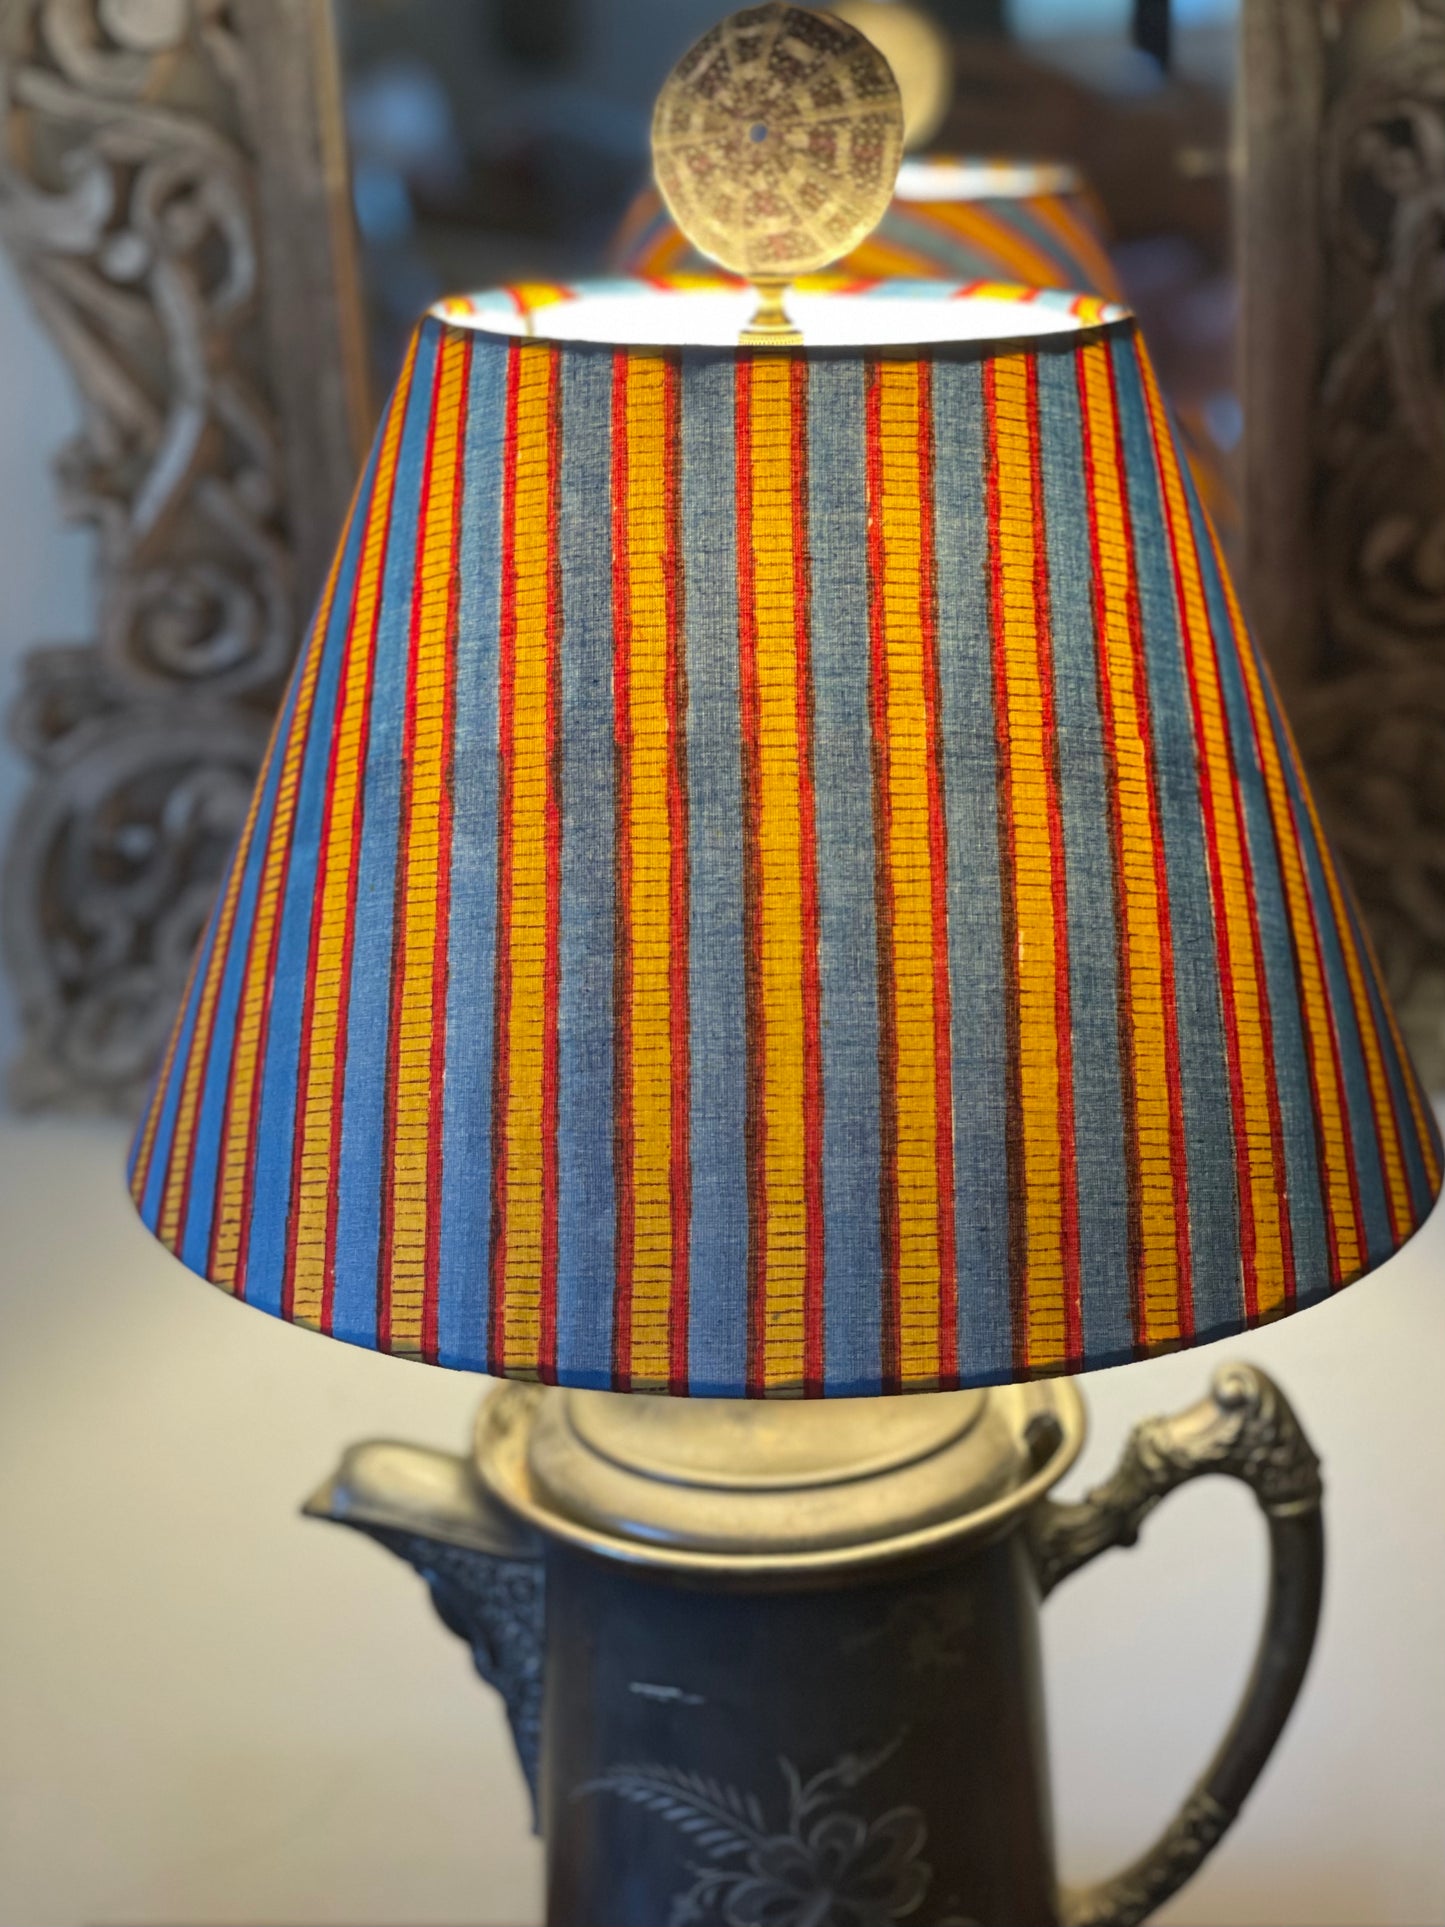 Small Conical Lampshade. Sanganeri Block Print from India. Azure Blue, Mustard, and Maroon Stripe.